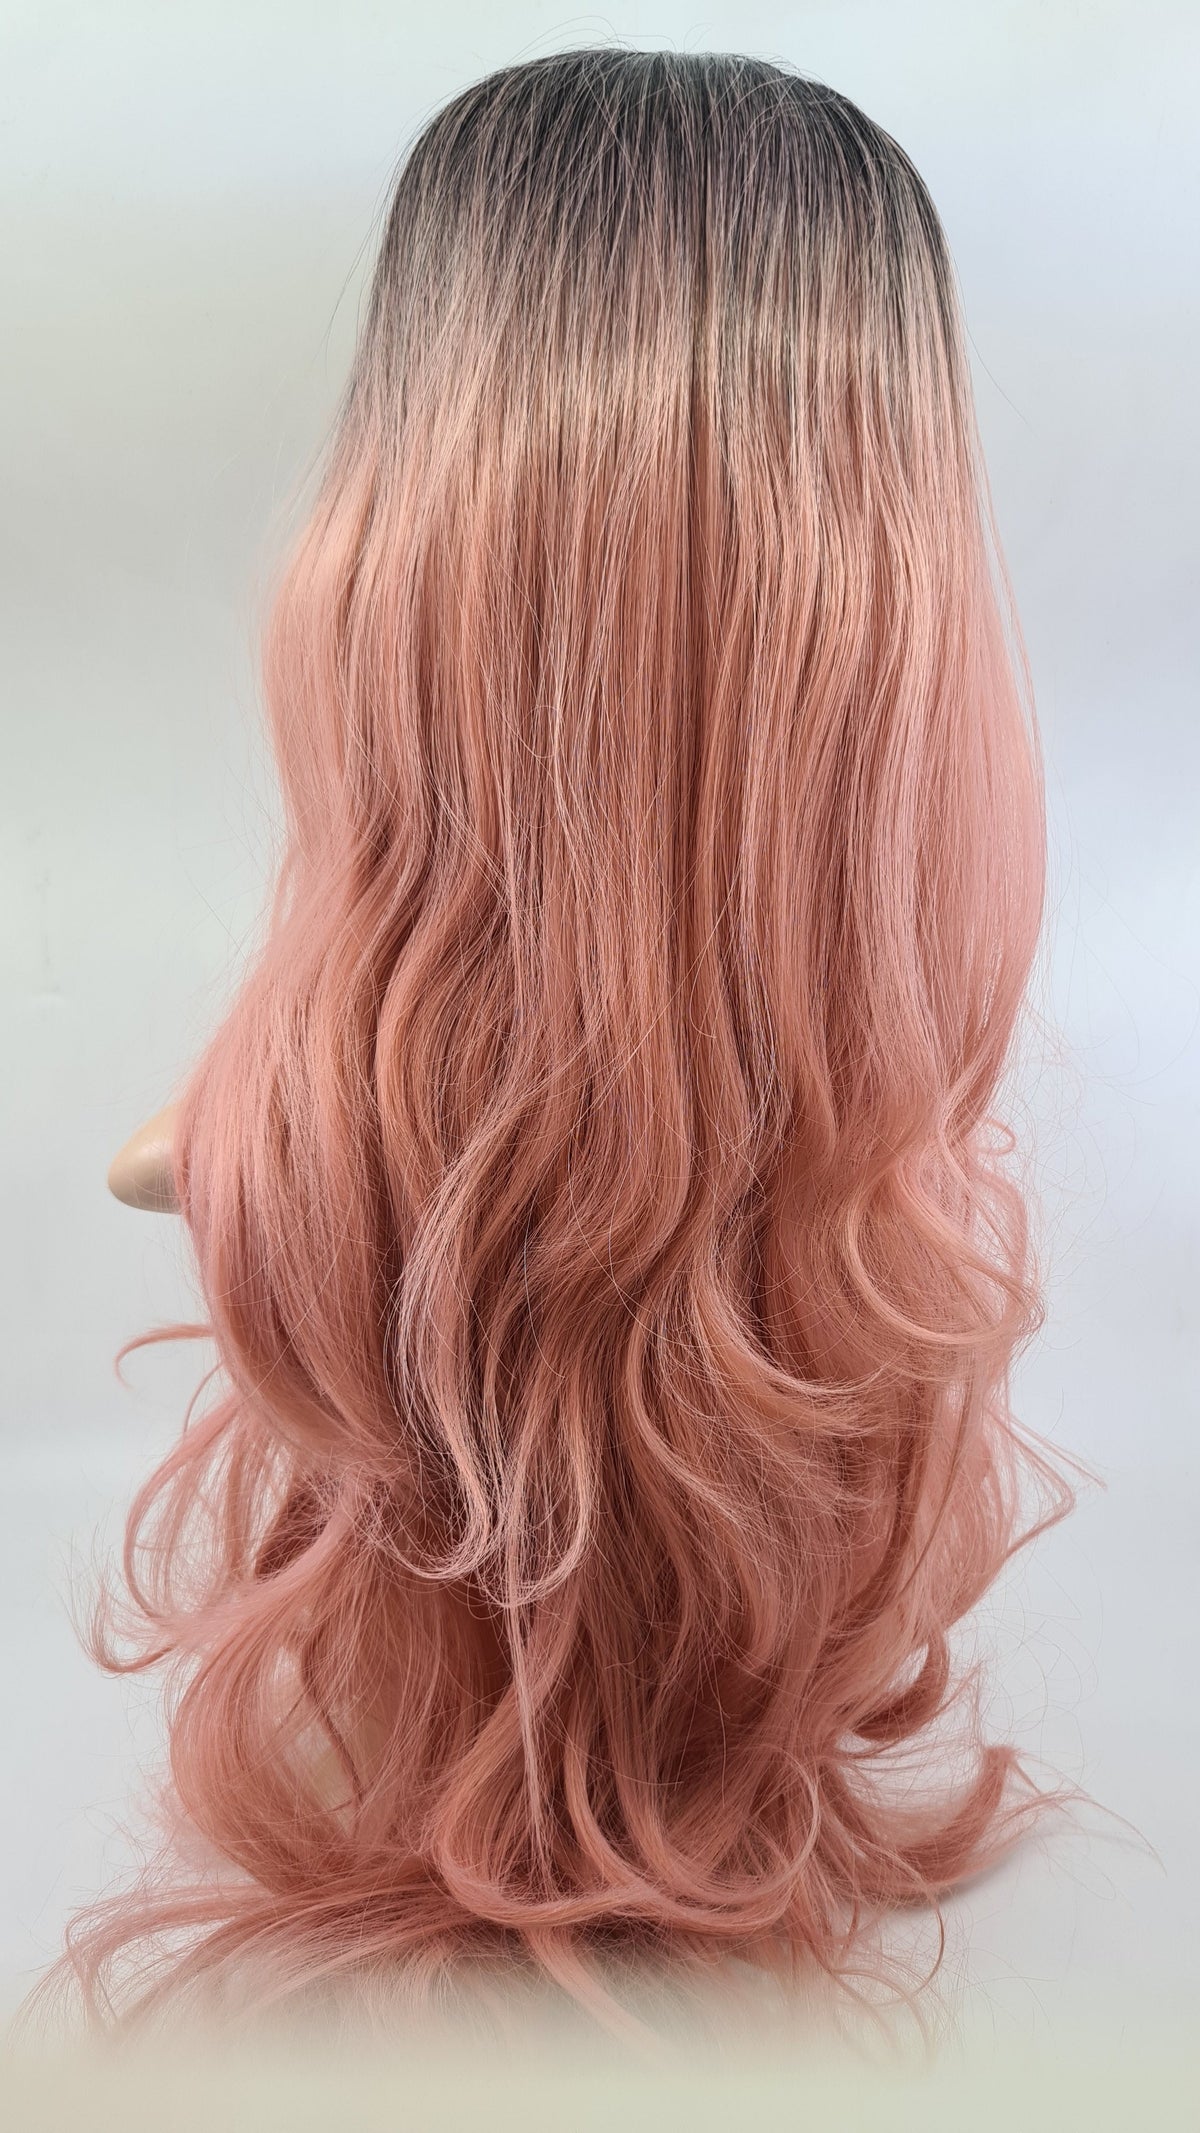 Wig- Samara- Ombre Black to Dusty Pink